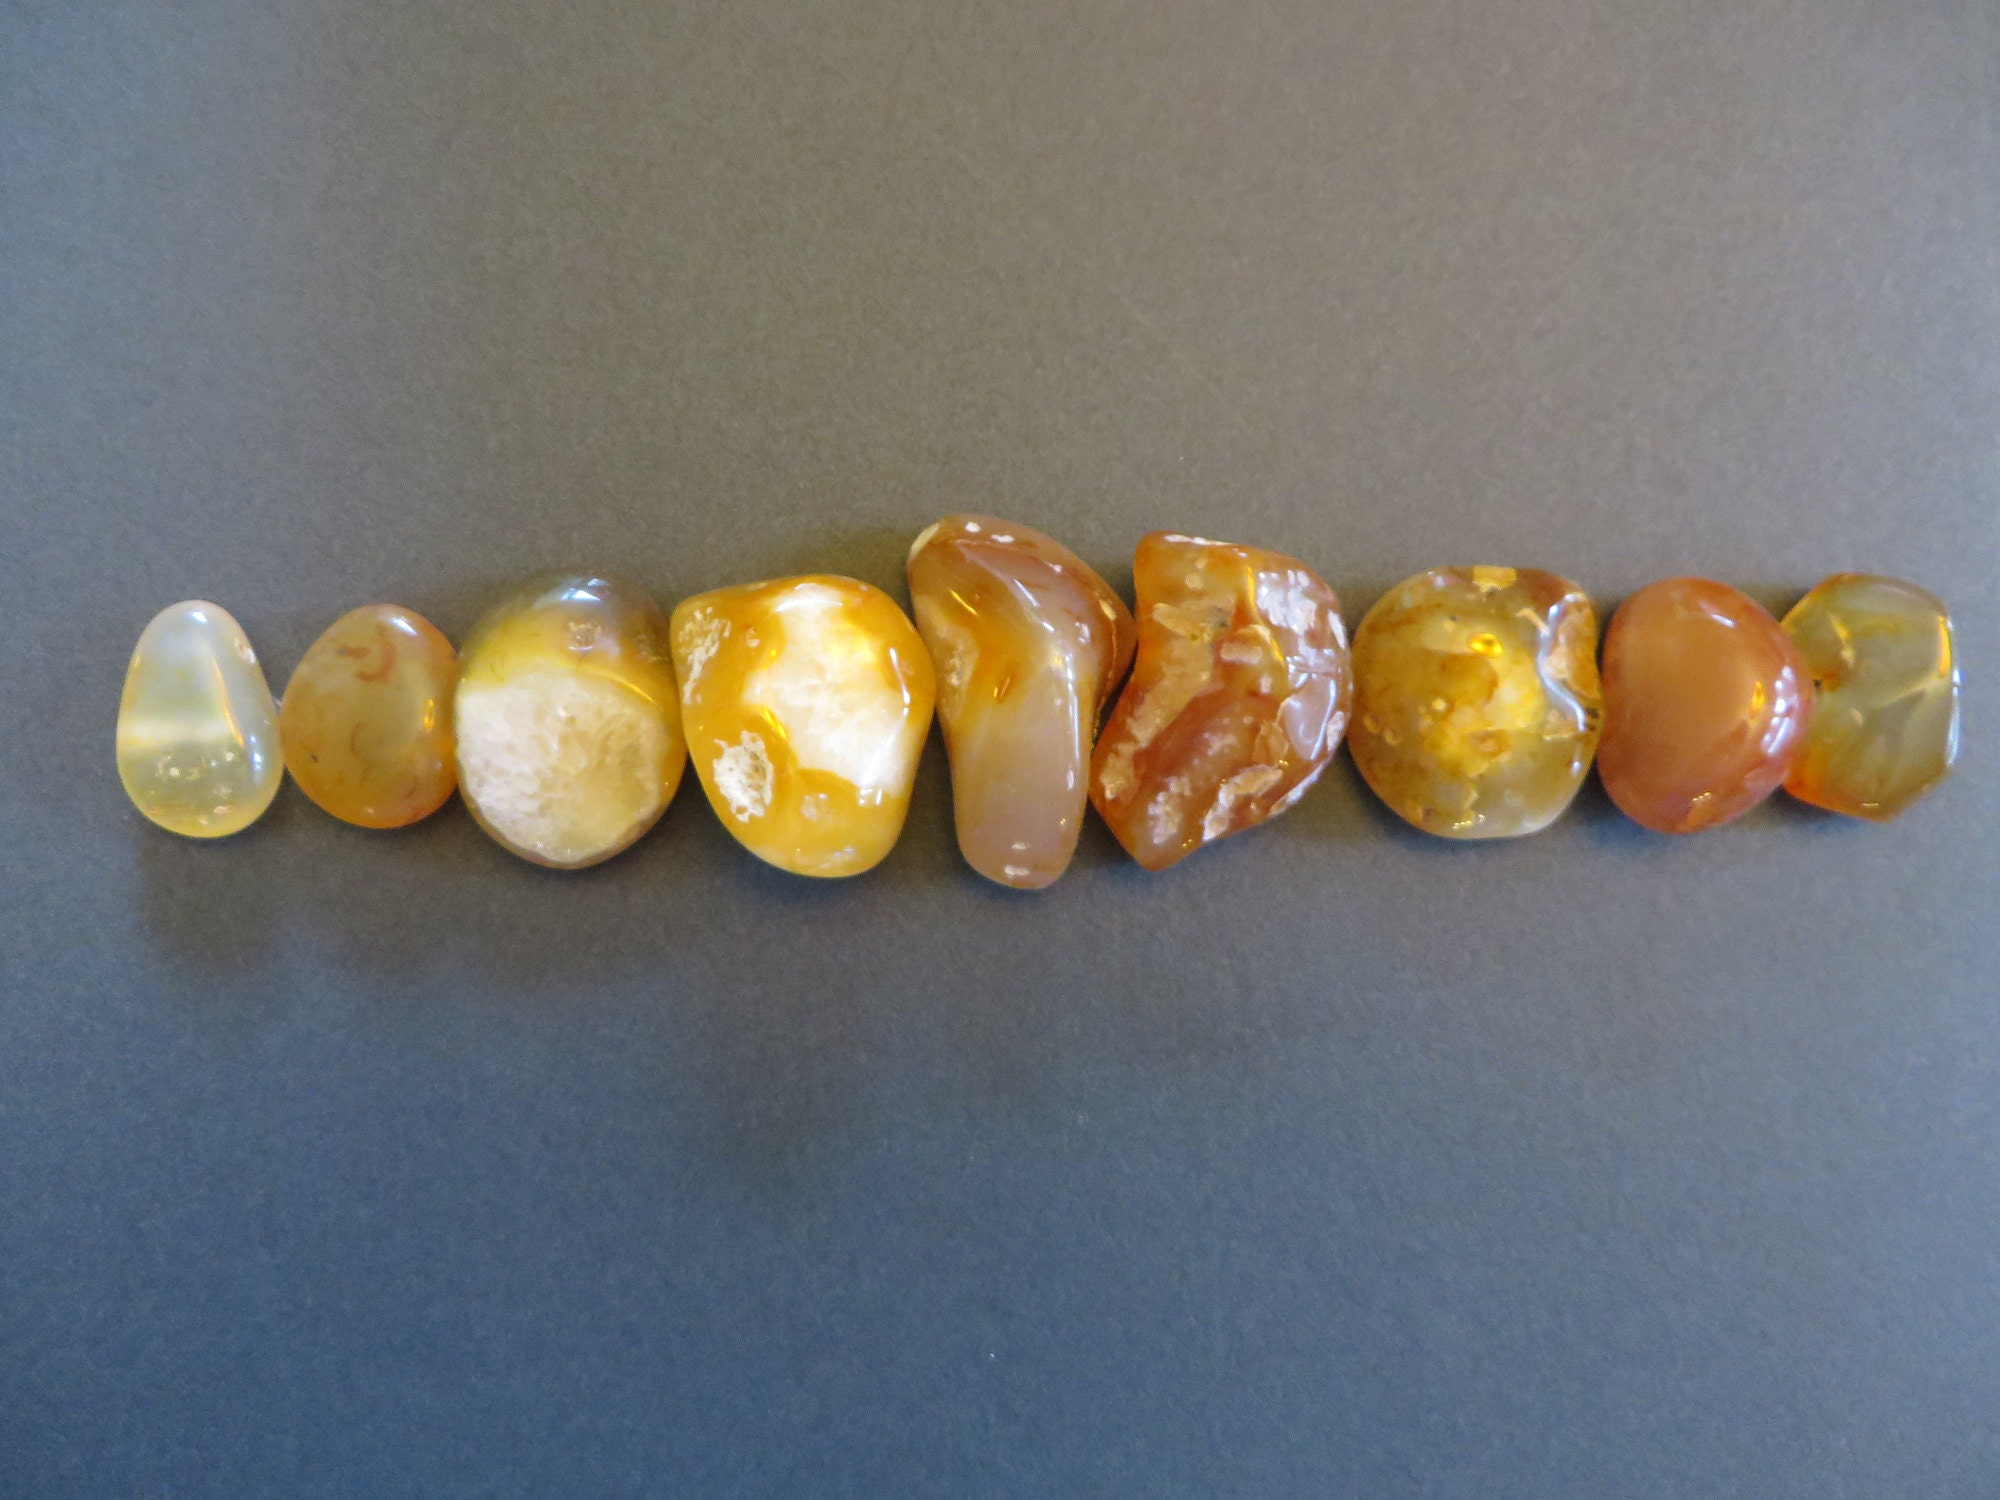 A little art project with some of my fav agates